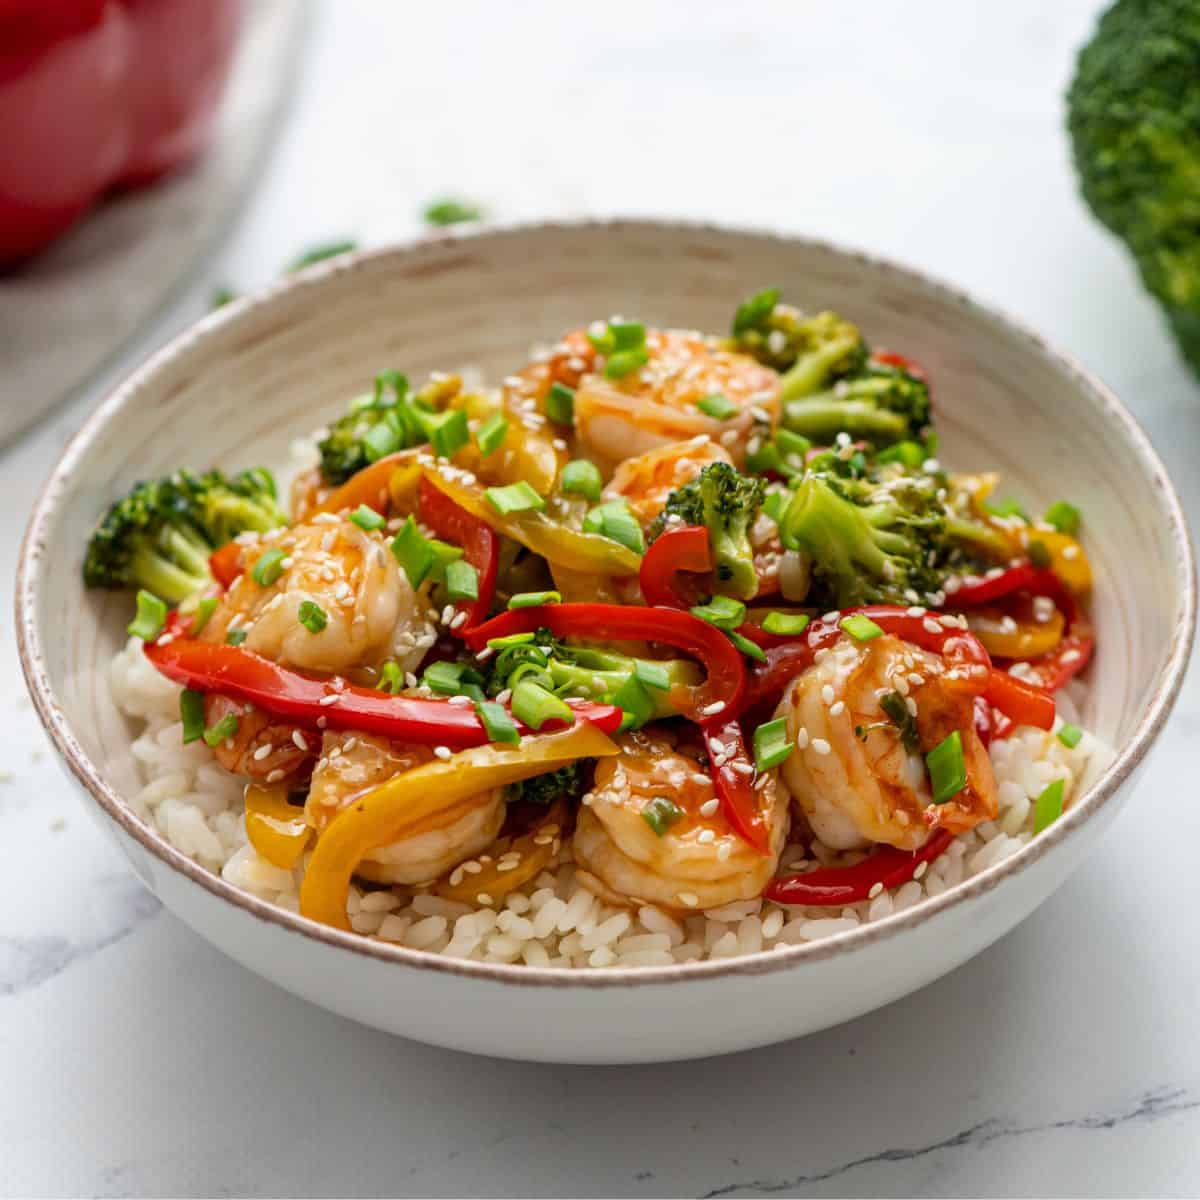 Shrimp stir fry served on top of rice with fresh broccoli in background.